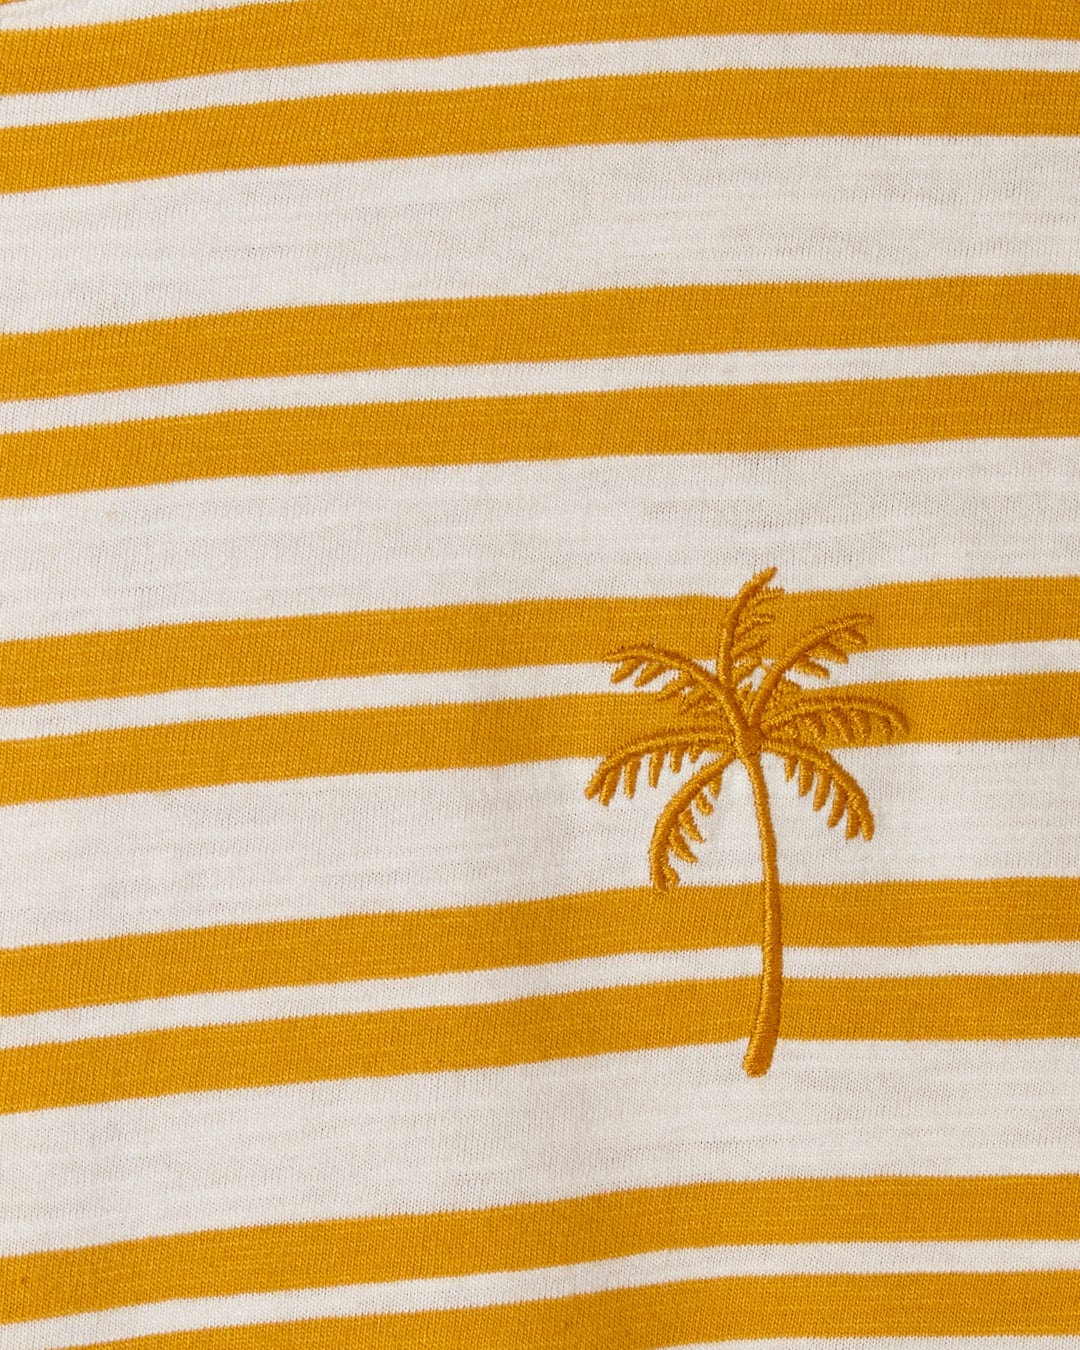 Close-up of a white and orange yarn dye stripe print fabric with an embroidered palm tree design in a contrasting orange thread on the Saltrock Sky - Womens Short Sleeve T-Shirt - Yellow.